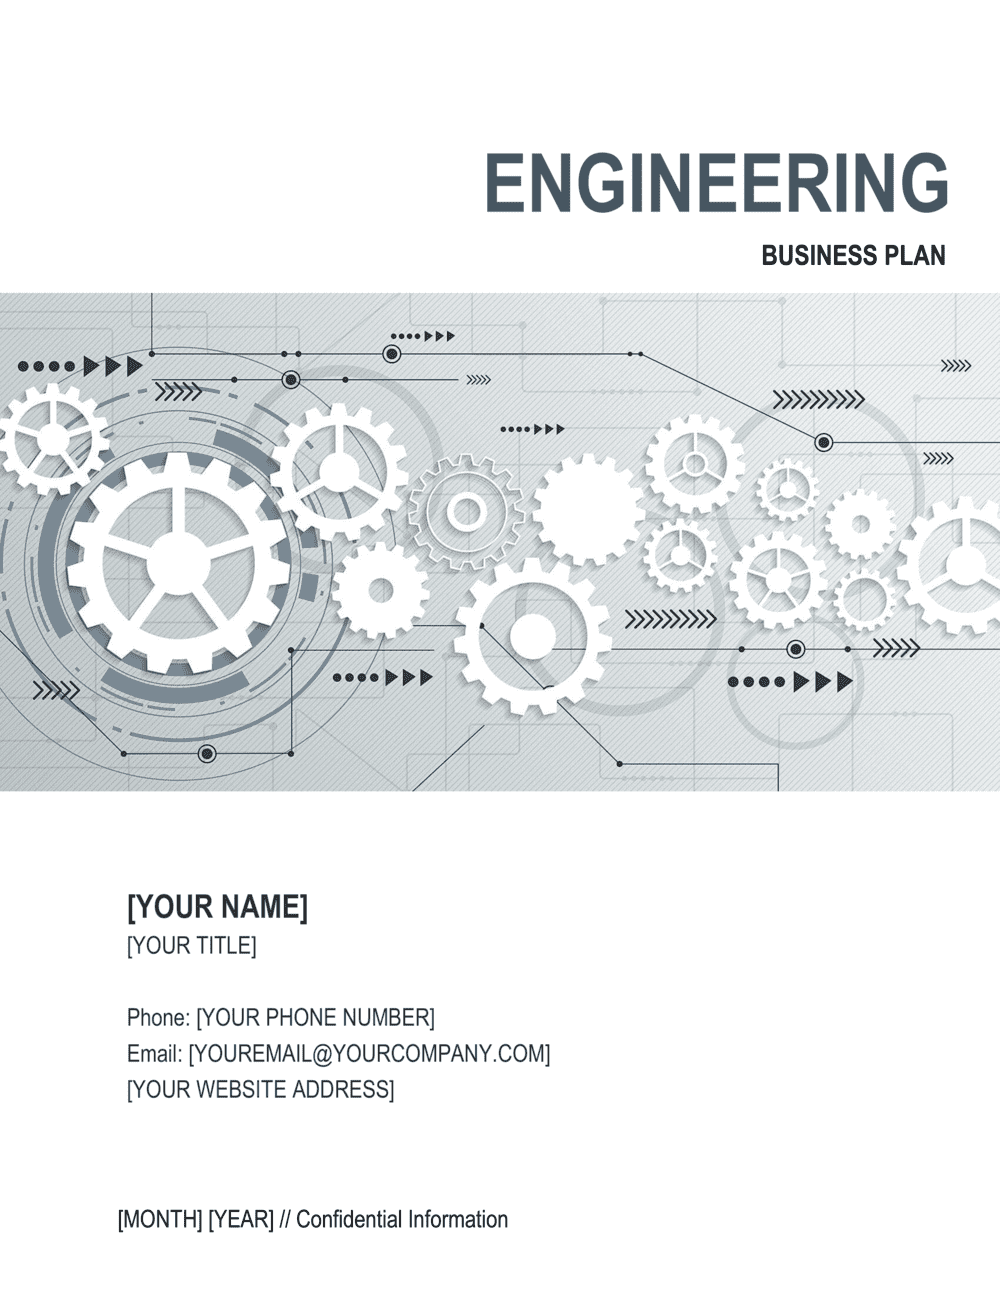 Engineering Business Plan Template | Business-in-a-Box™